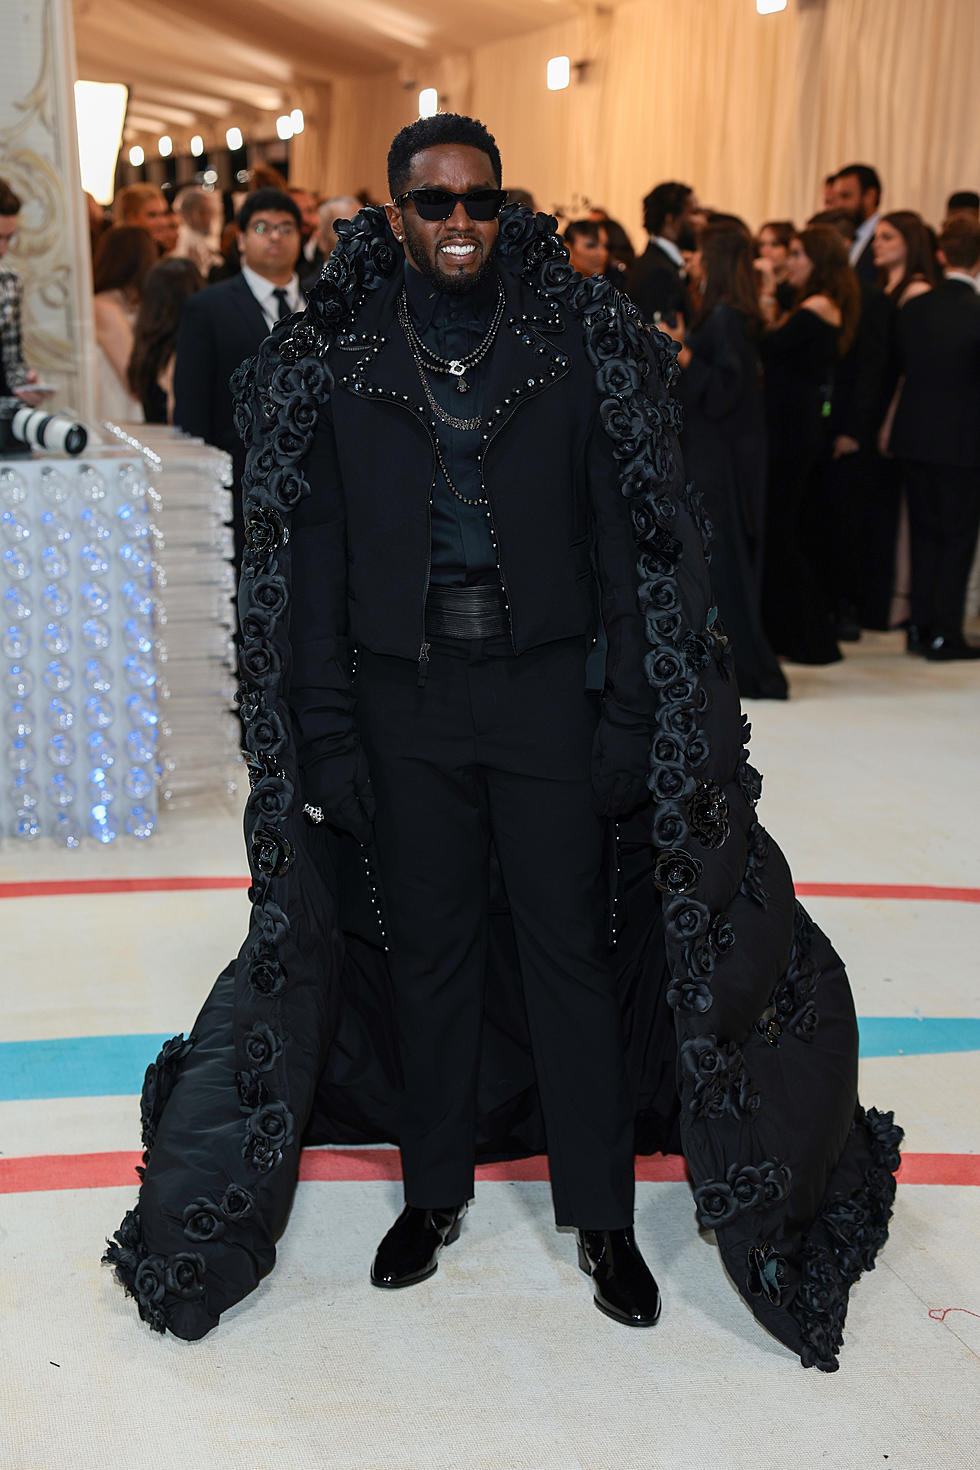 A$AP Rocky Apologizes to Woman He Jumped Over Before Met Gala - Rap-Up